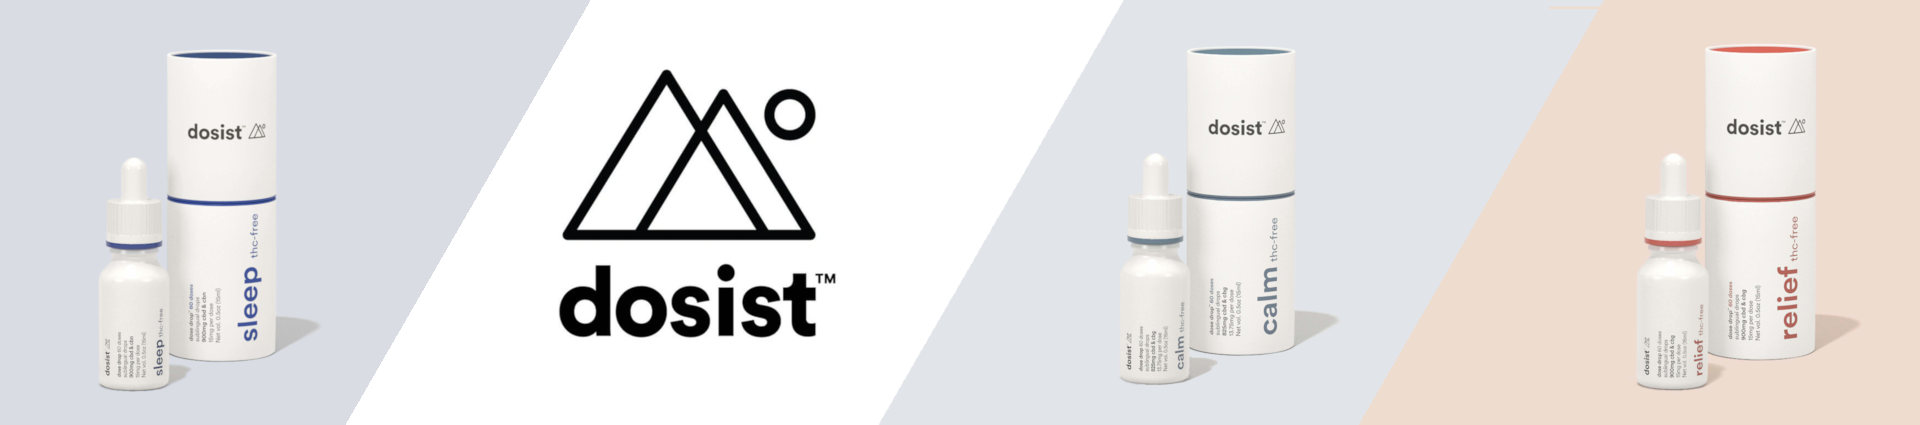 Dosist Product Lineup